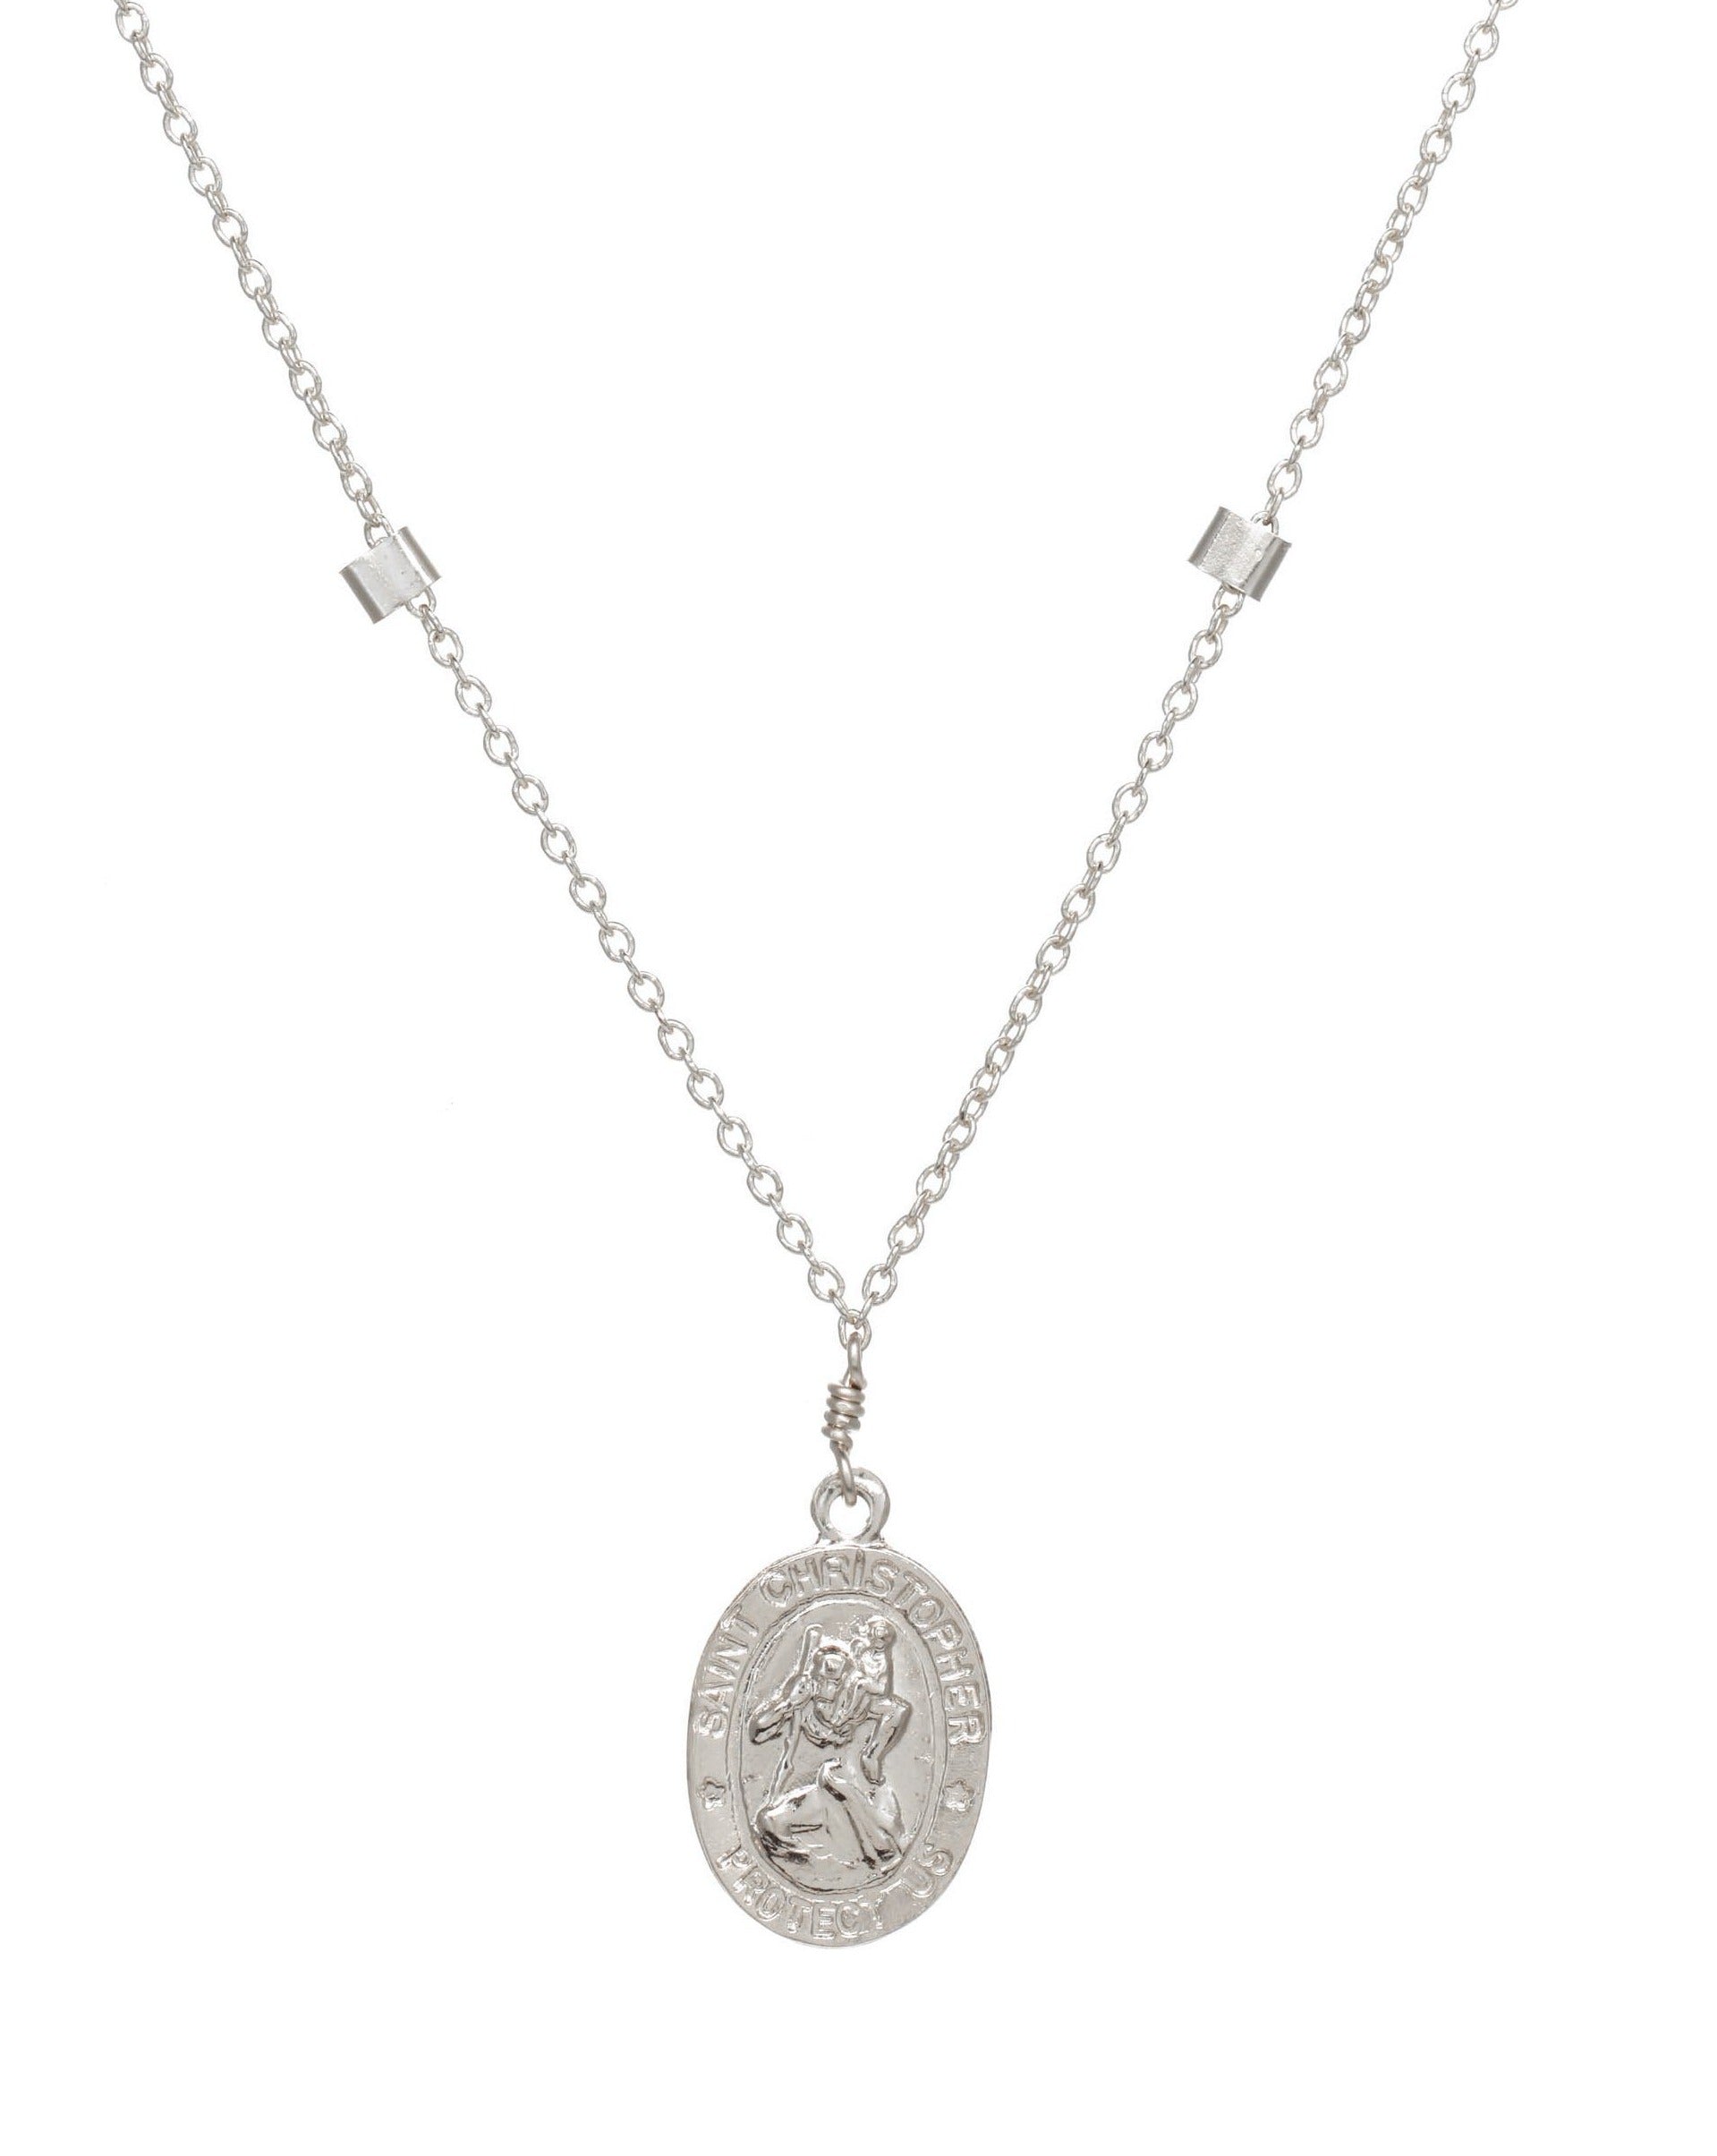 San Cris Oval Necklace by KOZAKH. A 16 to 18 inch adjustable length necklace, crafted in Sterling Silver, featuring a 16mm Saint Christopher oval Medallion.